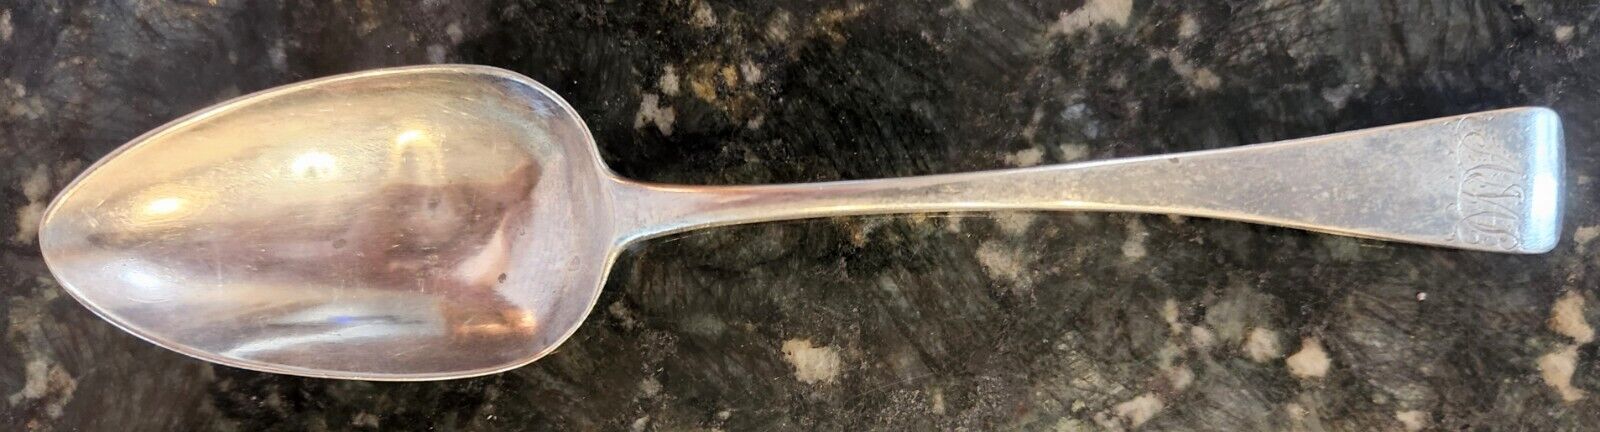 ENGLISH STERLING SILVER 9 1/4" STUFFING SPOON WILLIAM WELCH SR. EXETER 1809